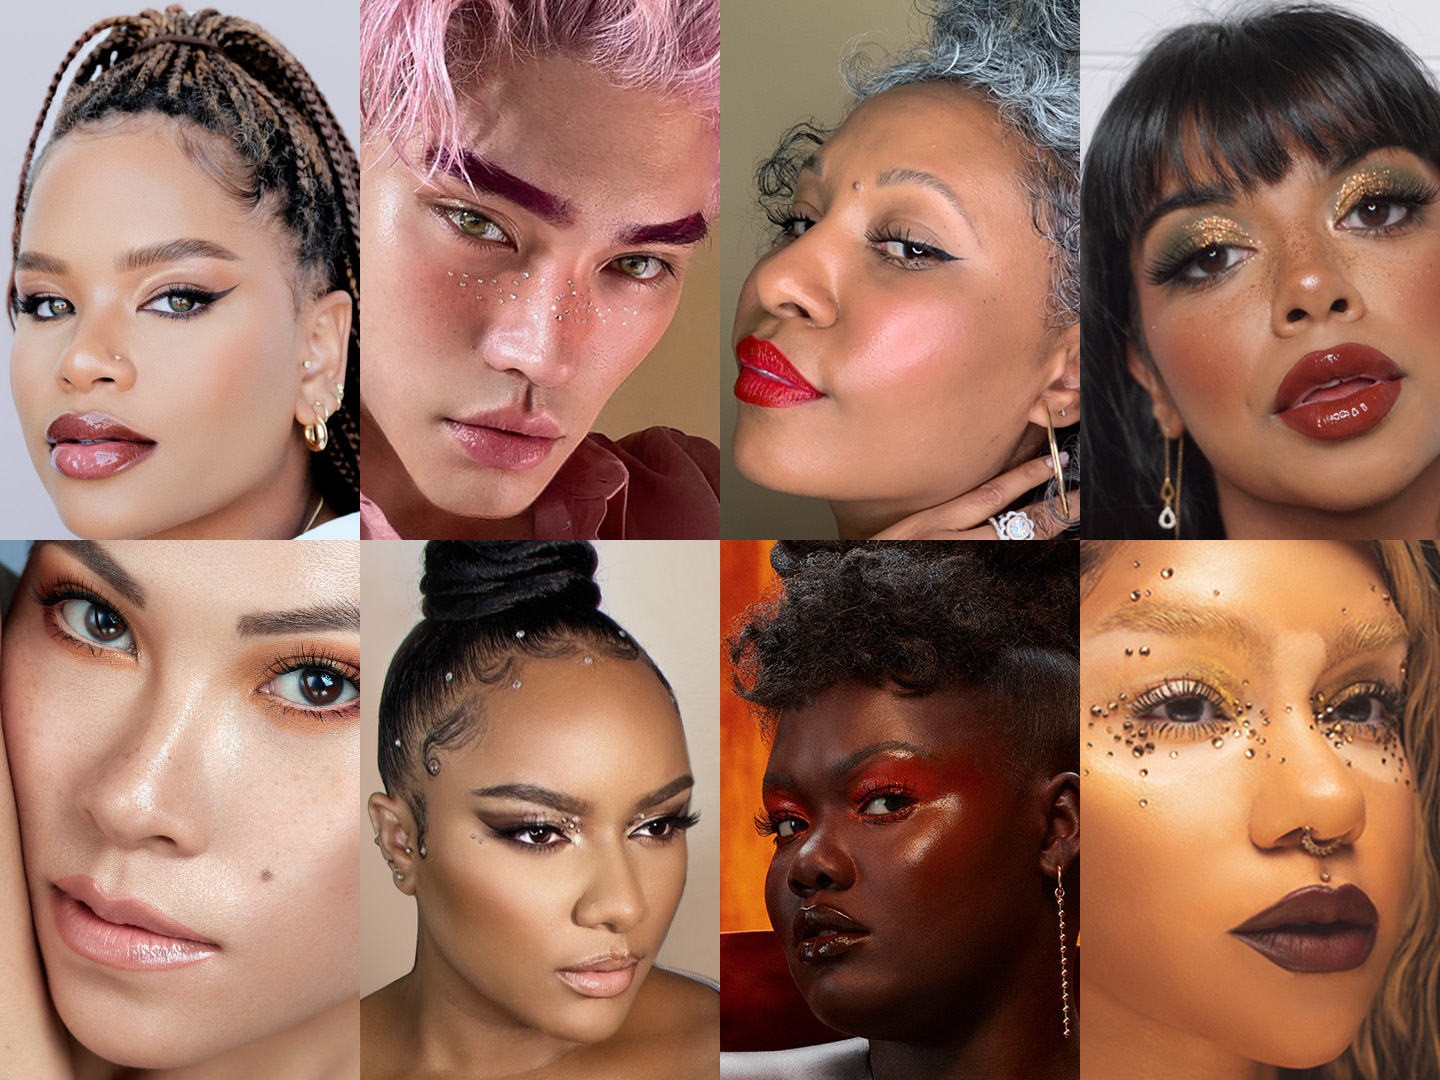 URG beauty creators from the "Make the World See All Beauty" campaign